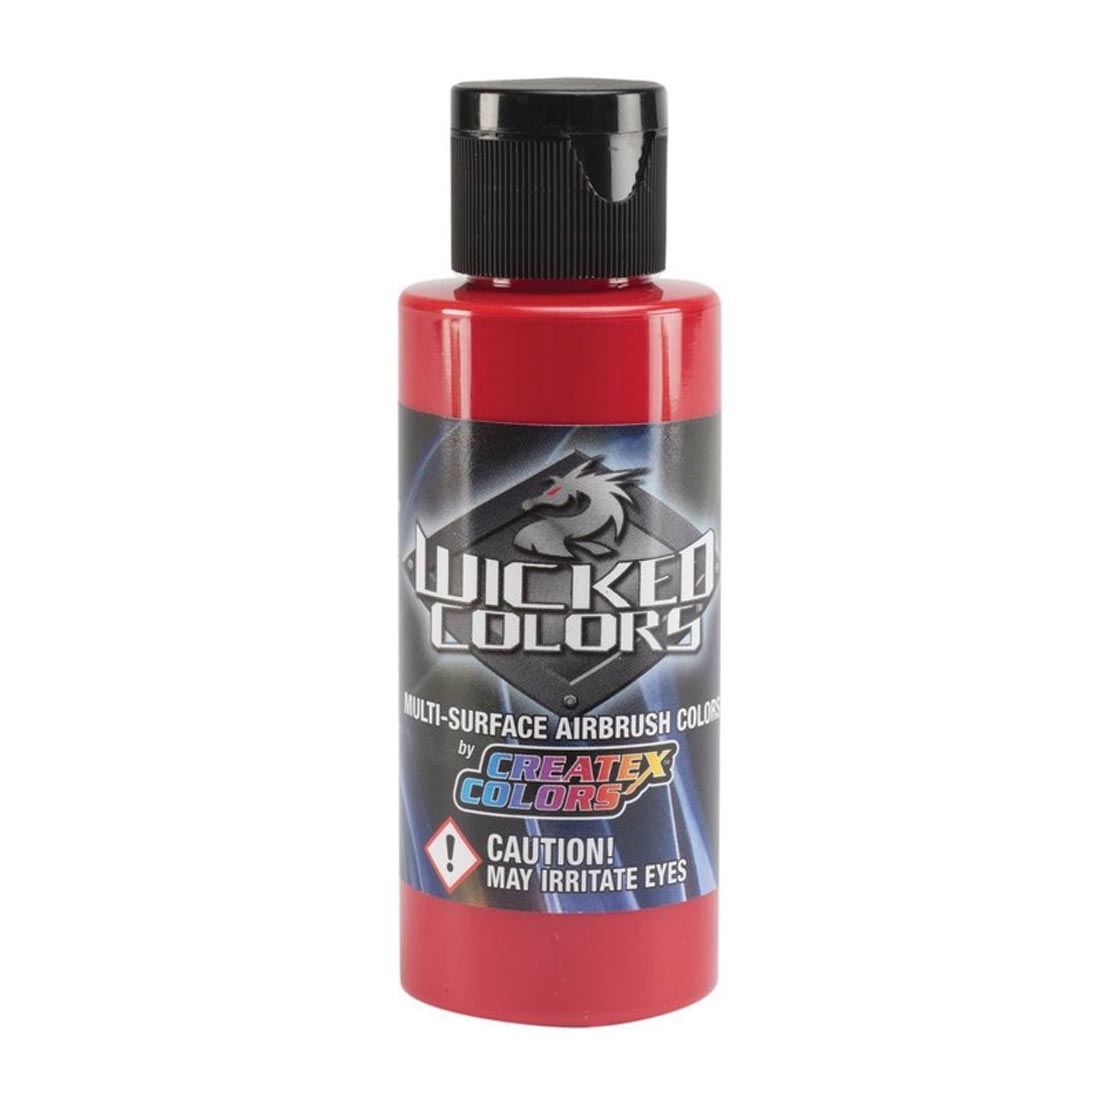 Bottle of Red Createx Wicked Colors Airbrush Paint